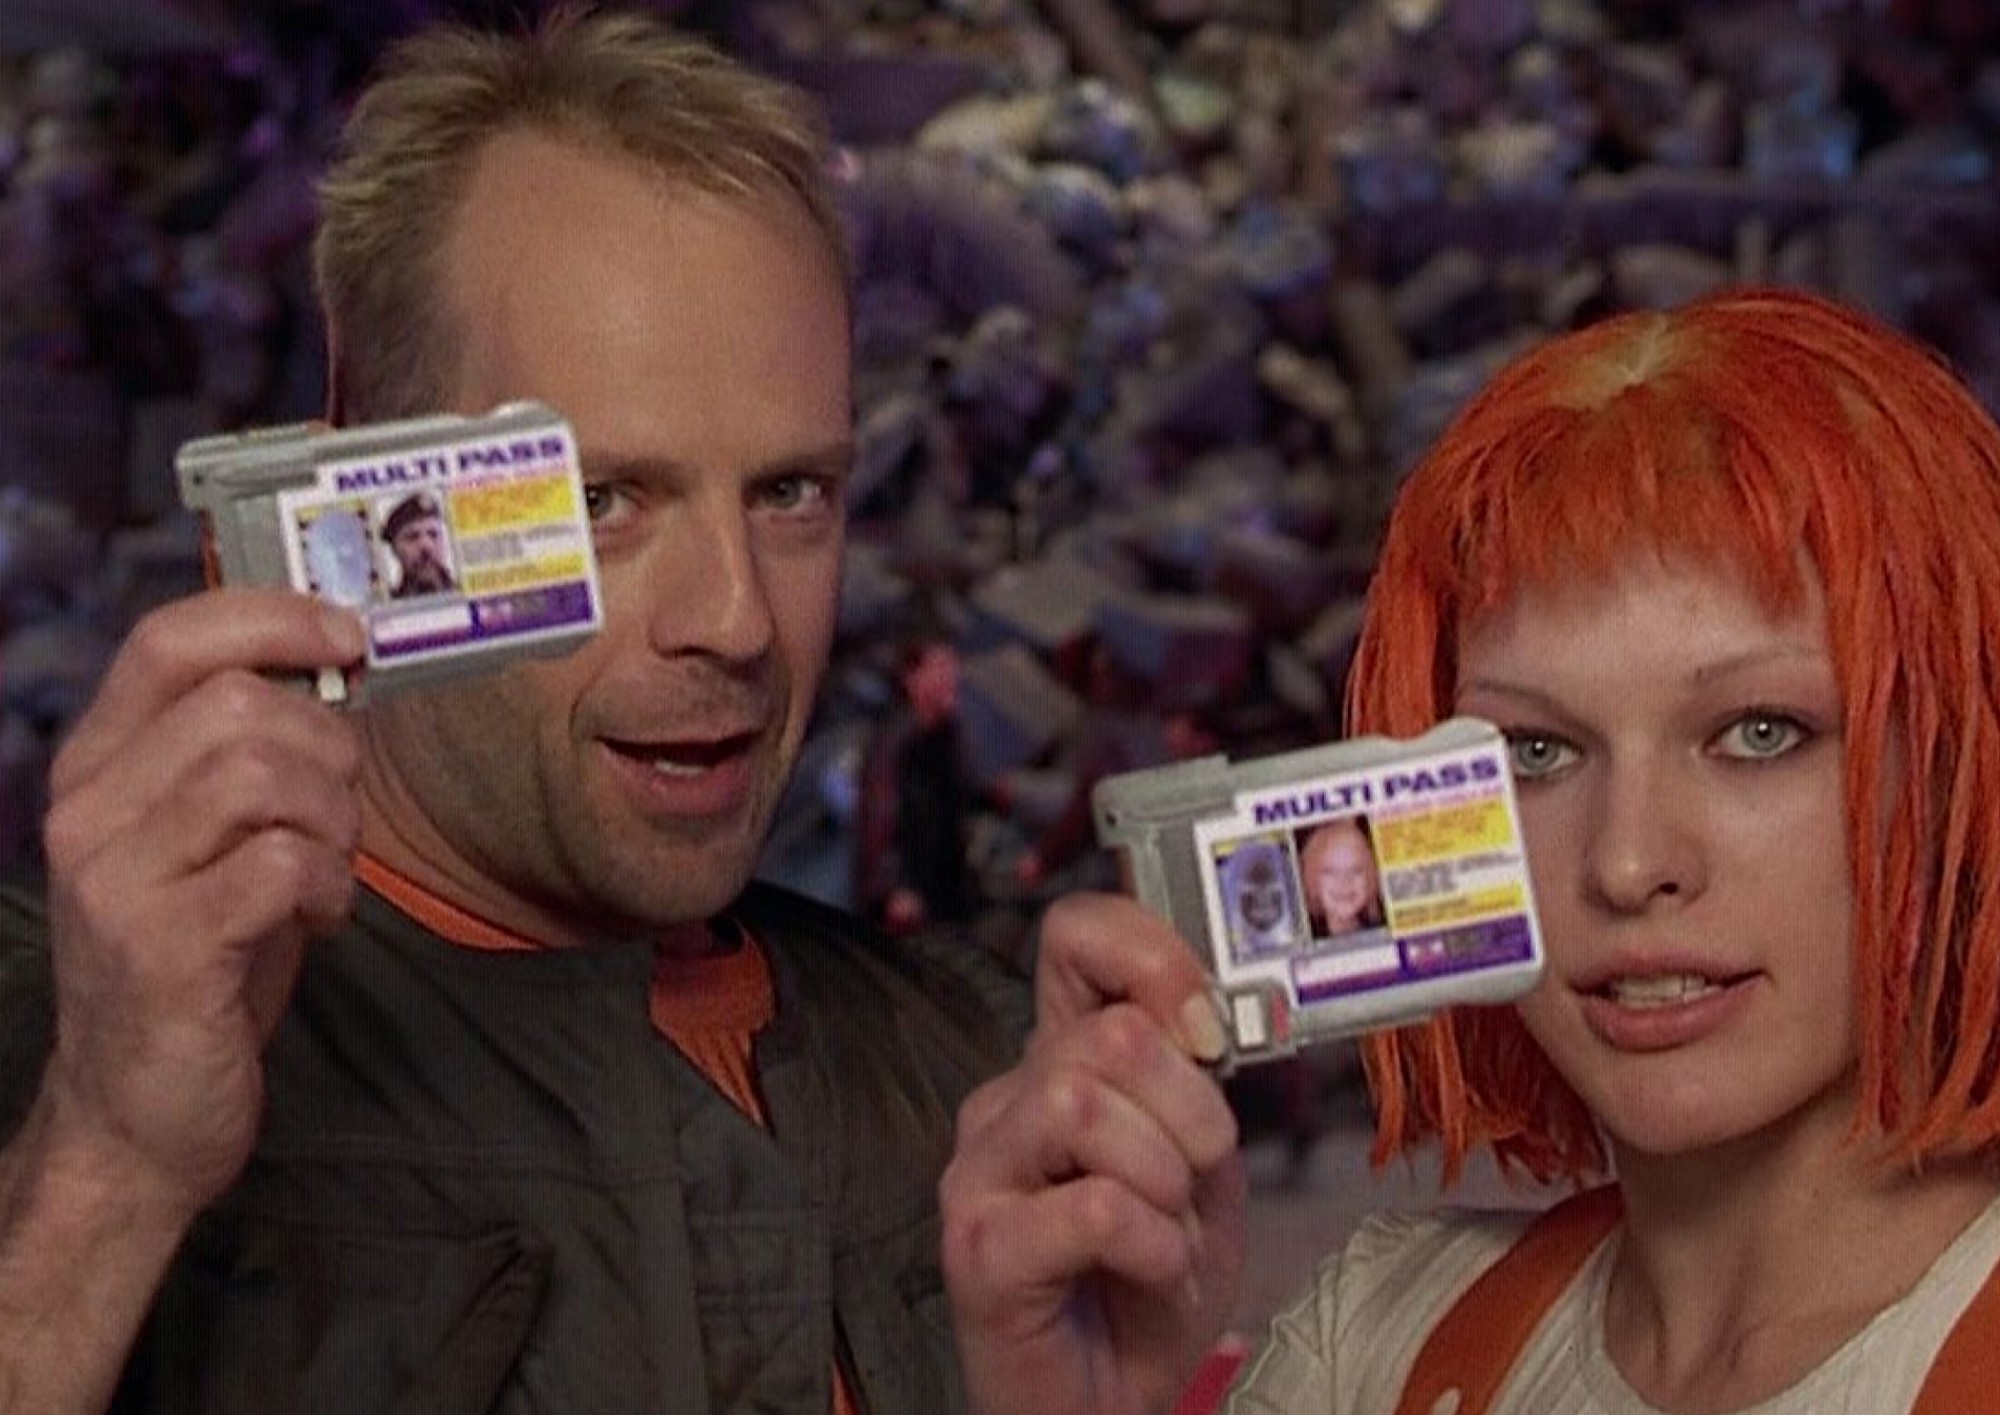 Image from the motion picture The Fifth Element